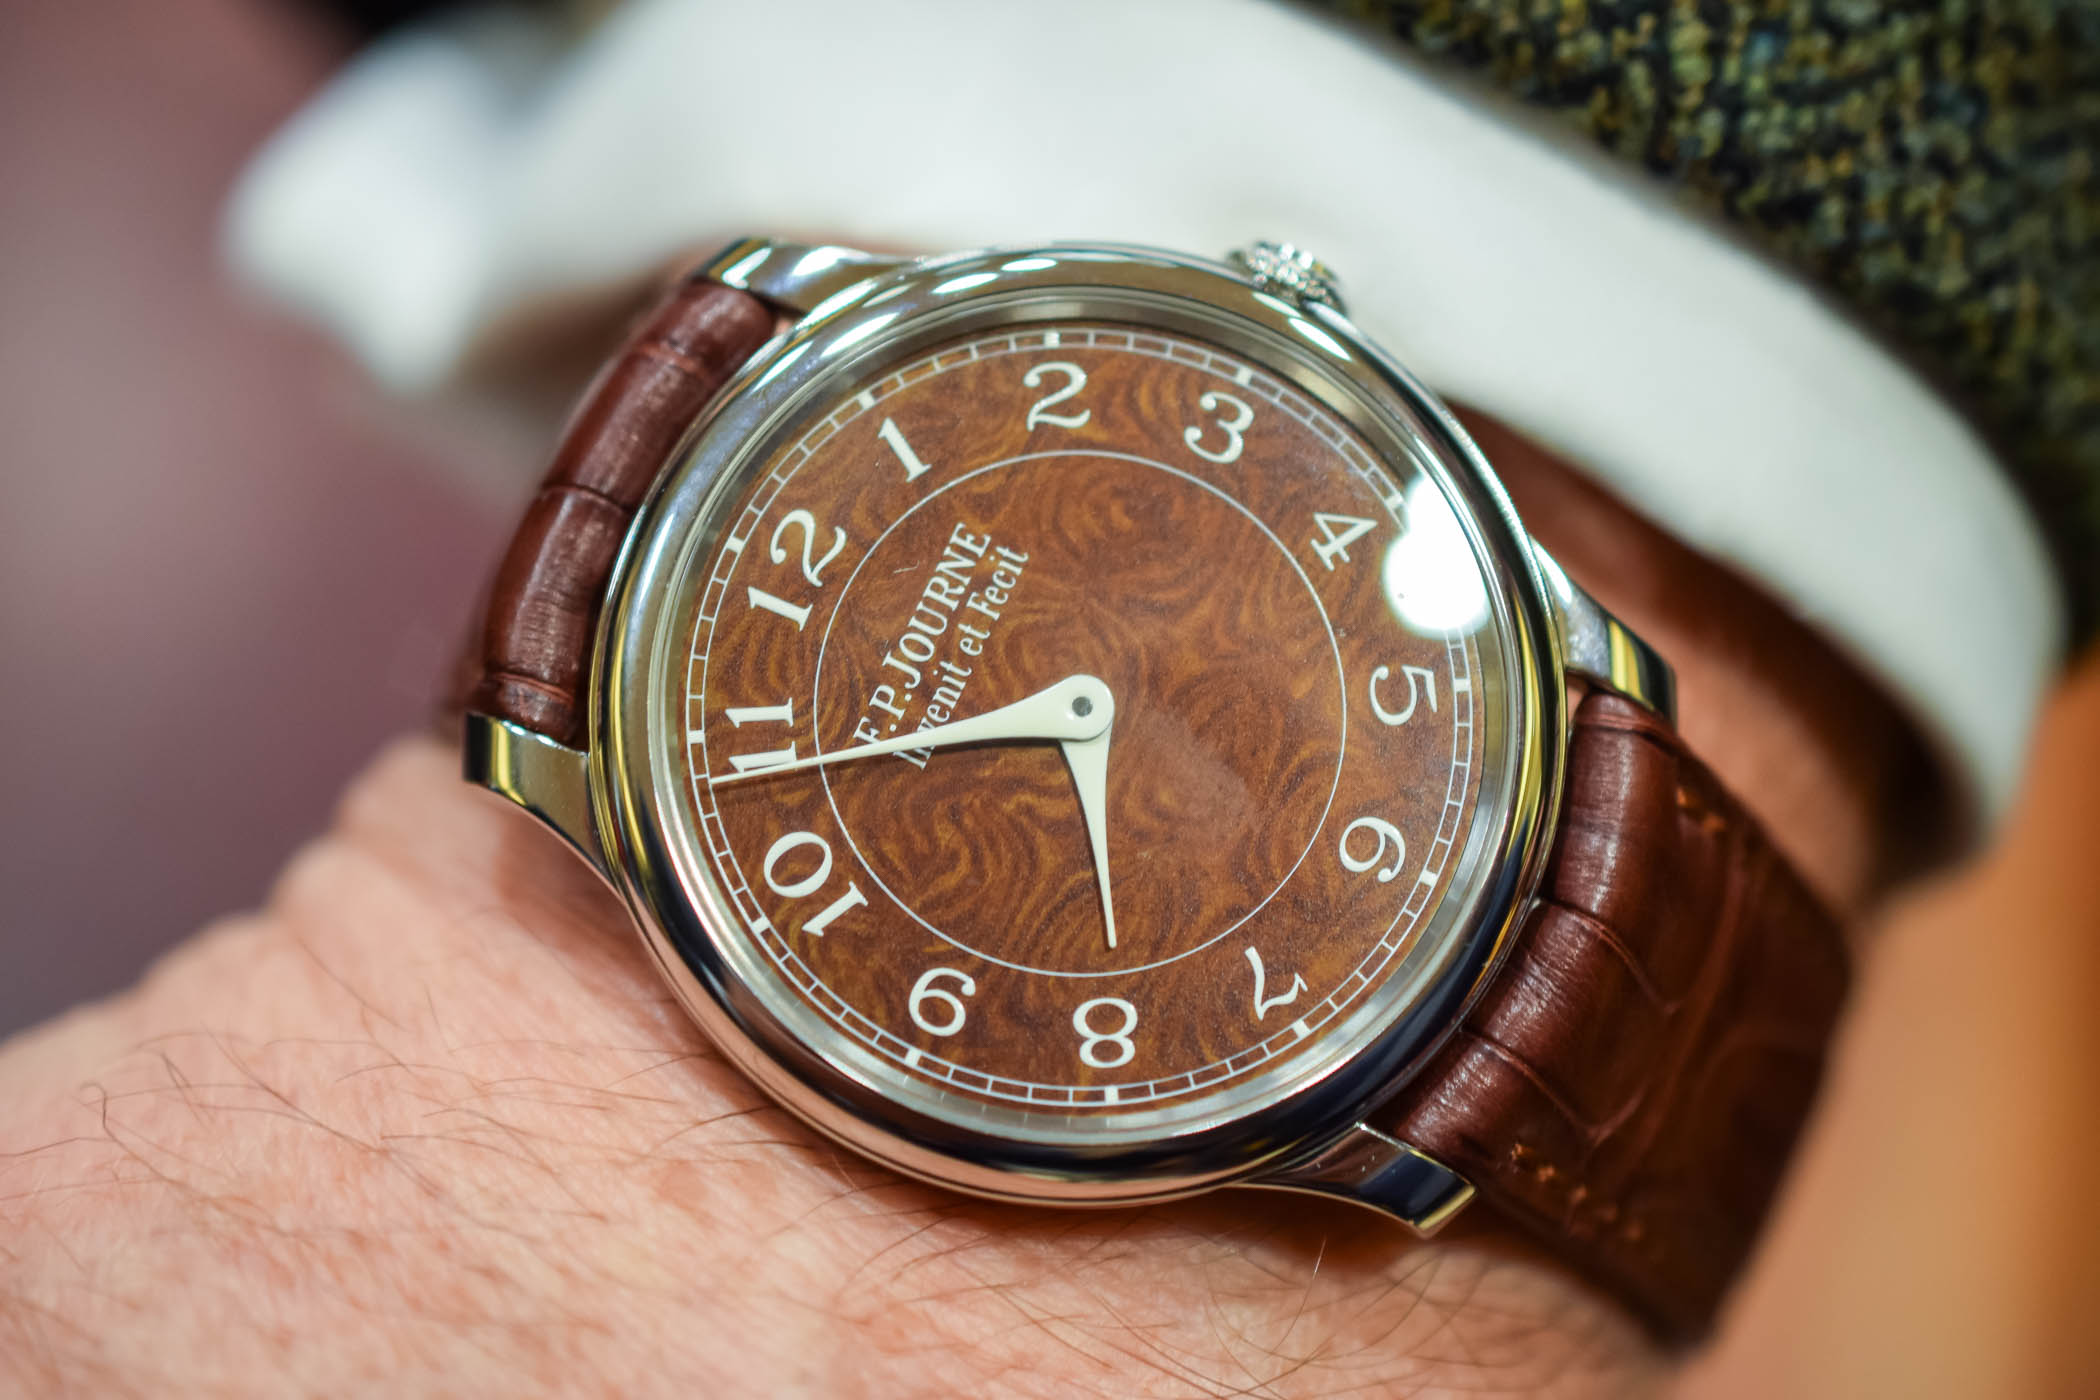 FP Journe Chronometre Hoilland and Holland Damascus Steel Dial